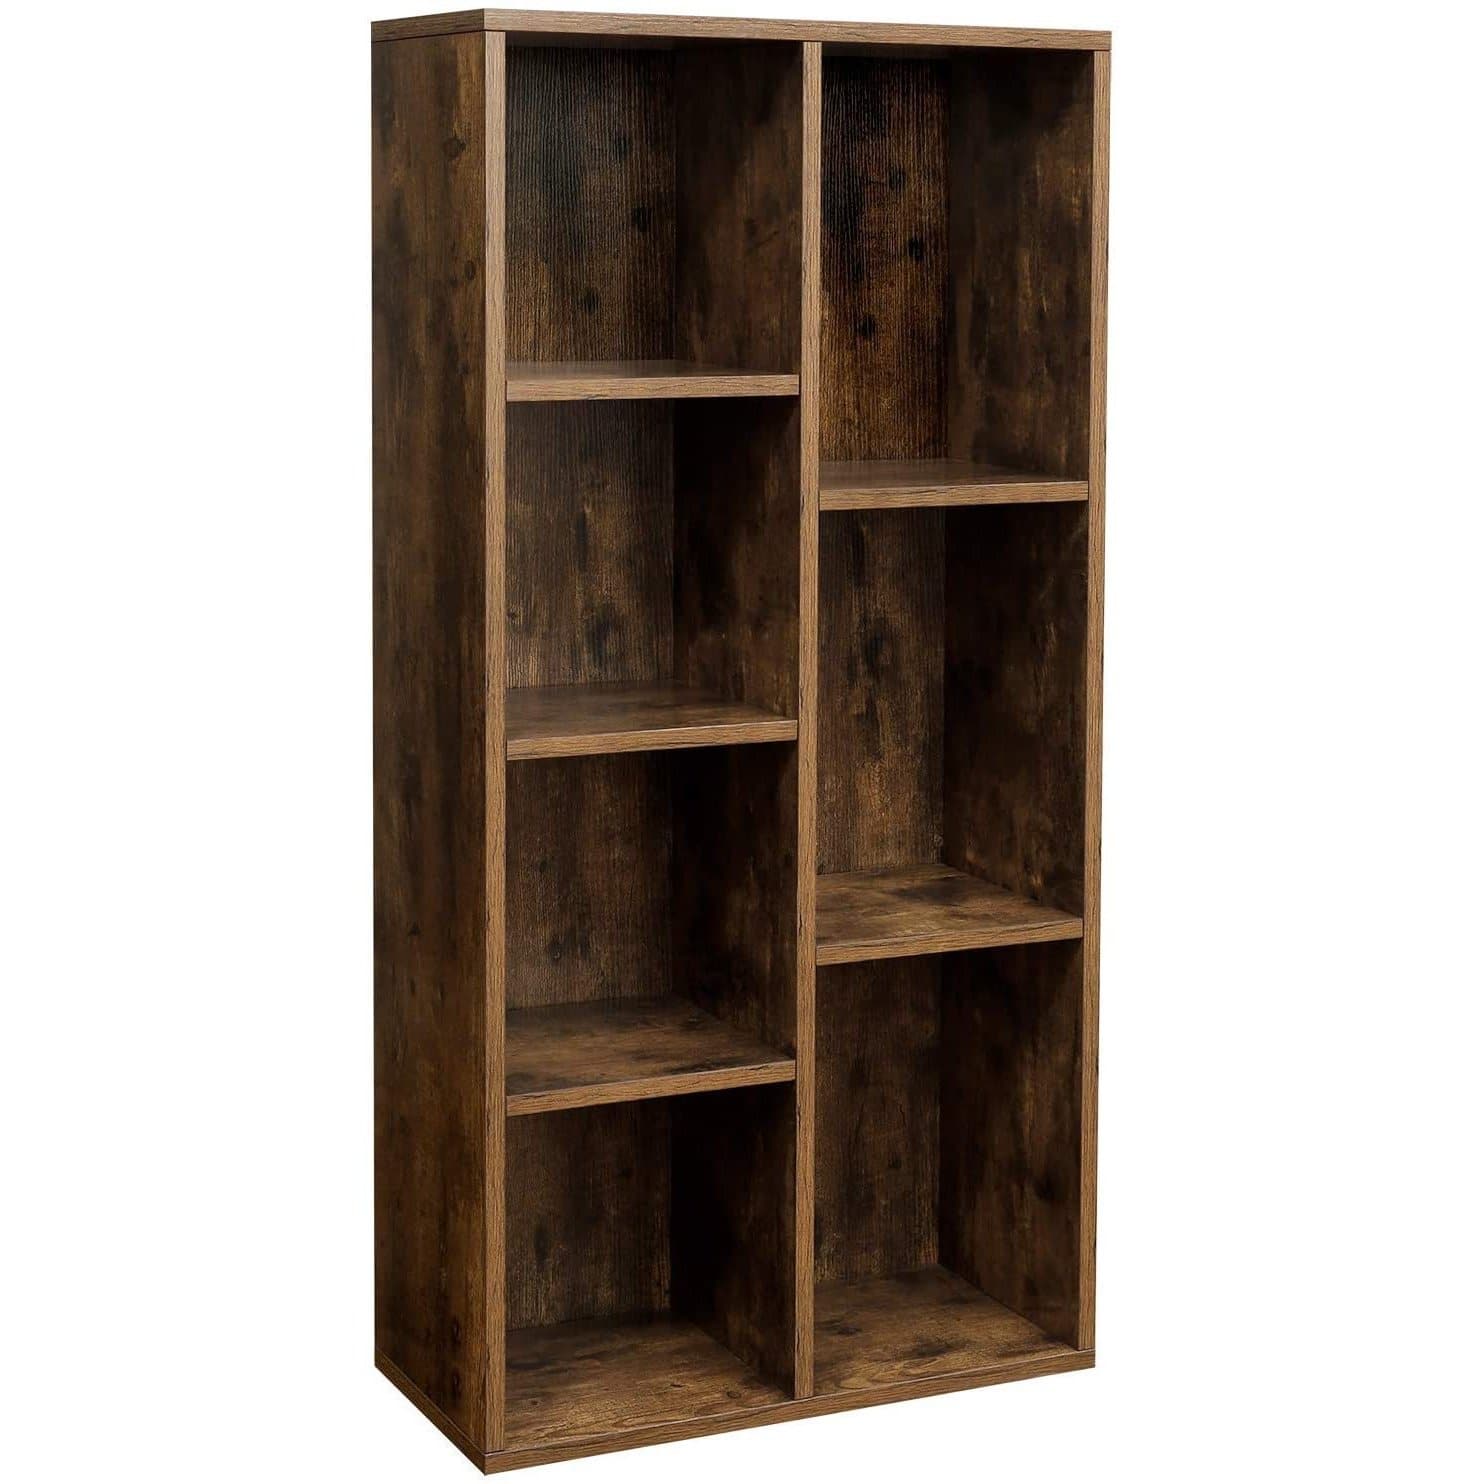 Nancy's Bookcase - Storage Cabinet - 7 Compartments - Industrial - Wood - Brown - 50 x 24 x 106 cm